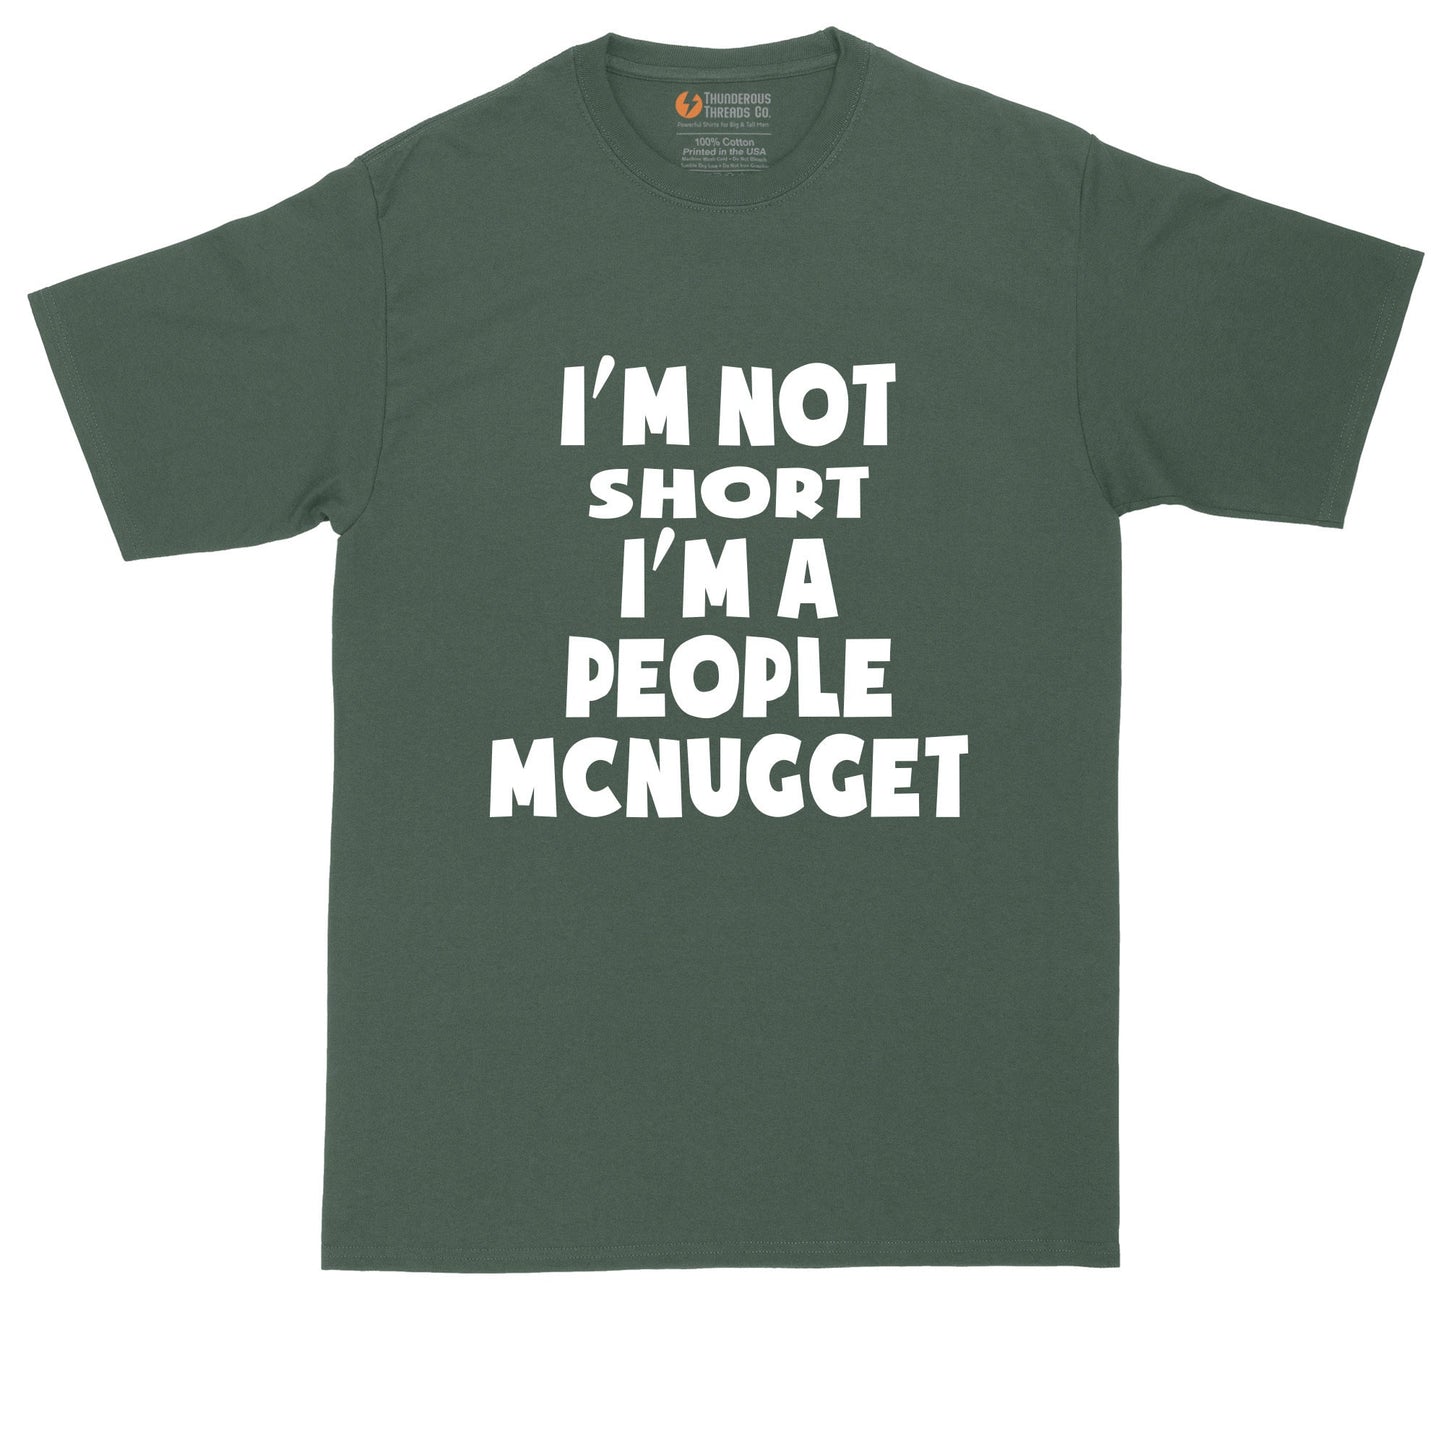 I'm Not Short I'm a People McNugget | Big and Tall Mens T-Shirt | Funny T-Shirt | Graphic T-Shirt